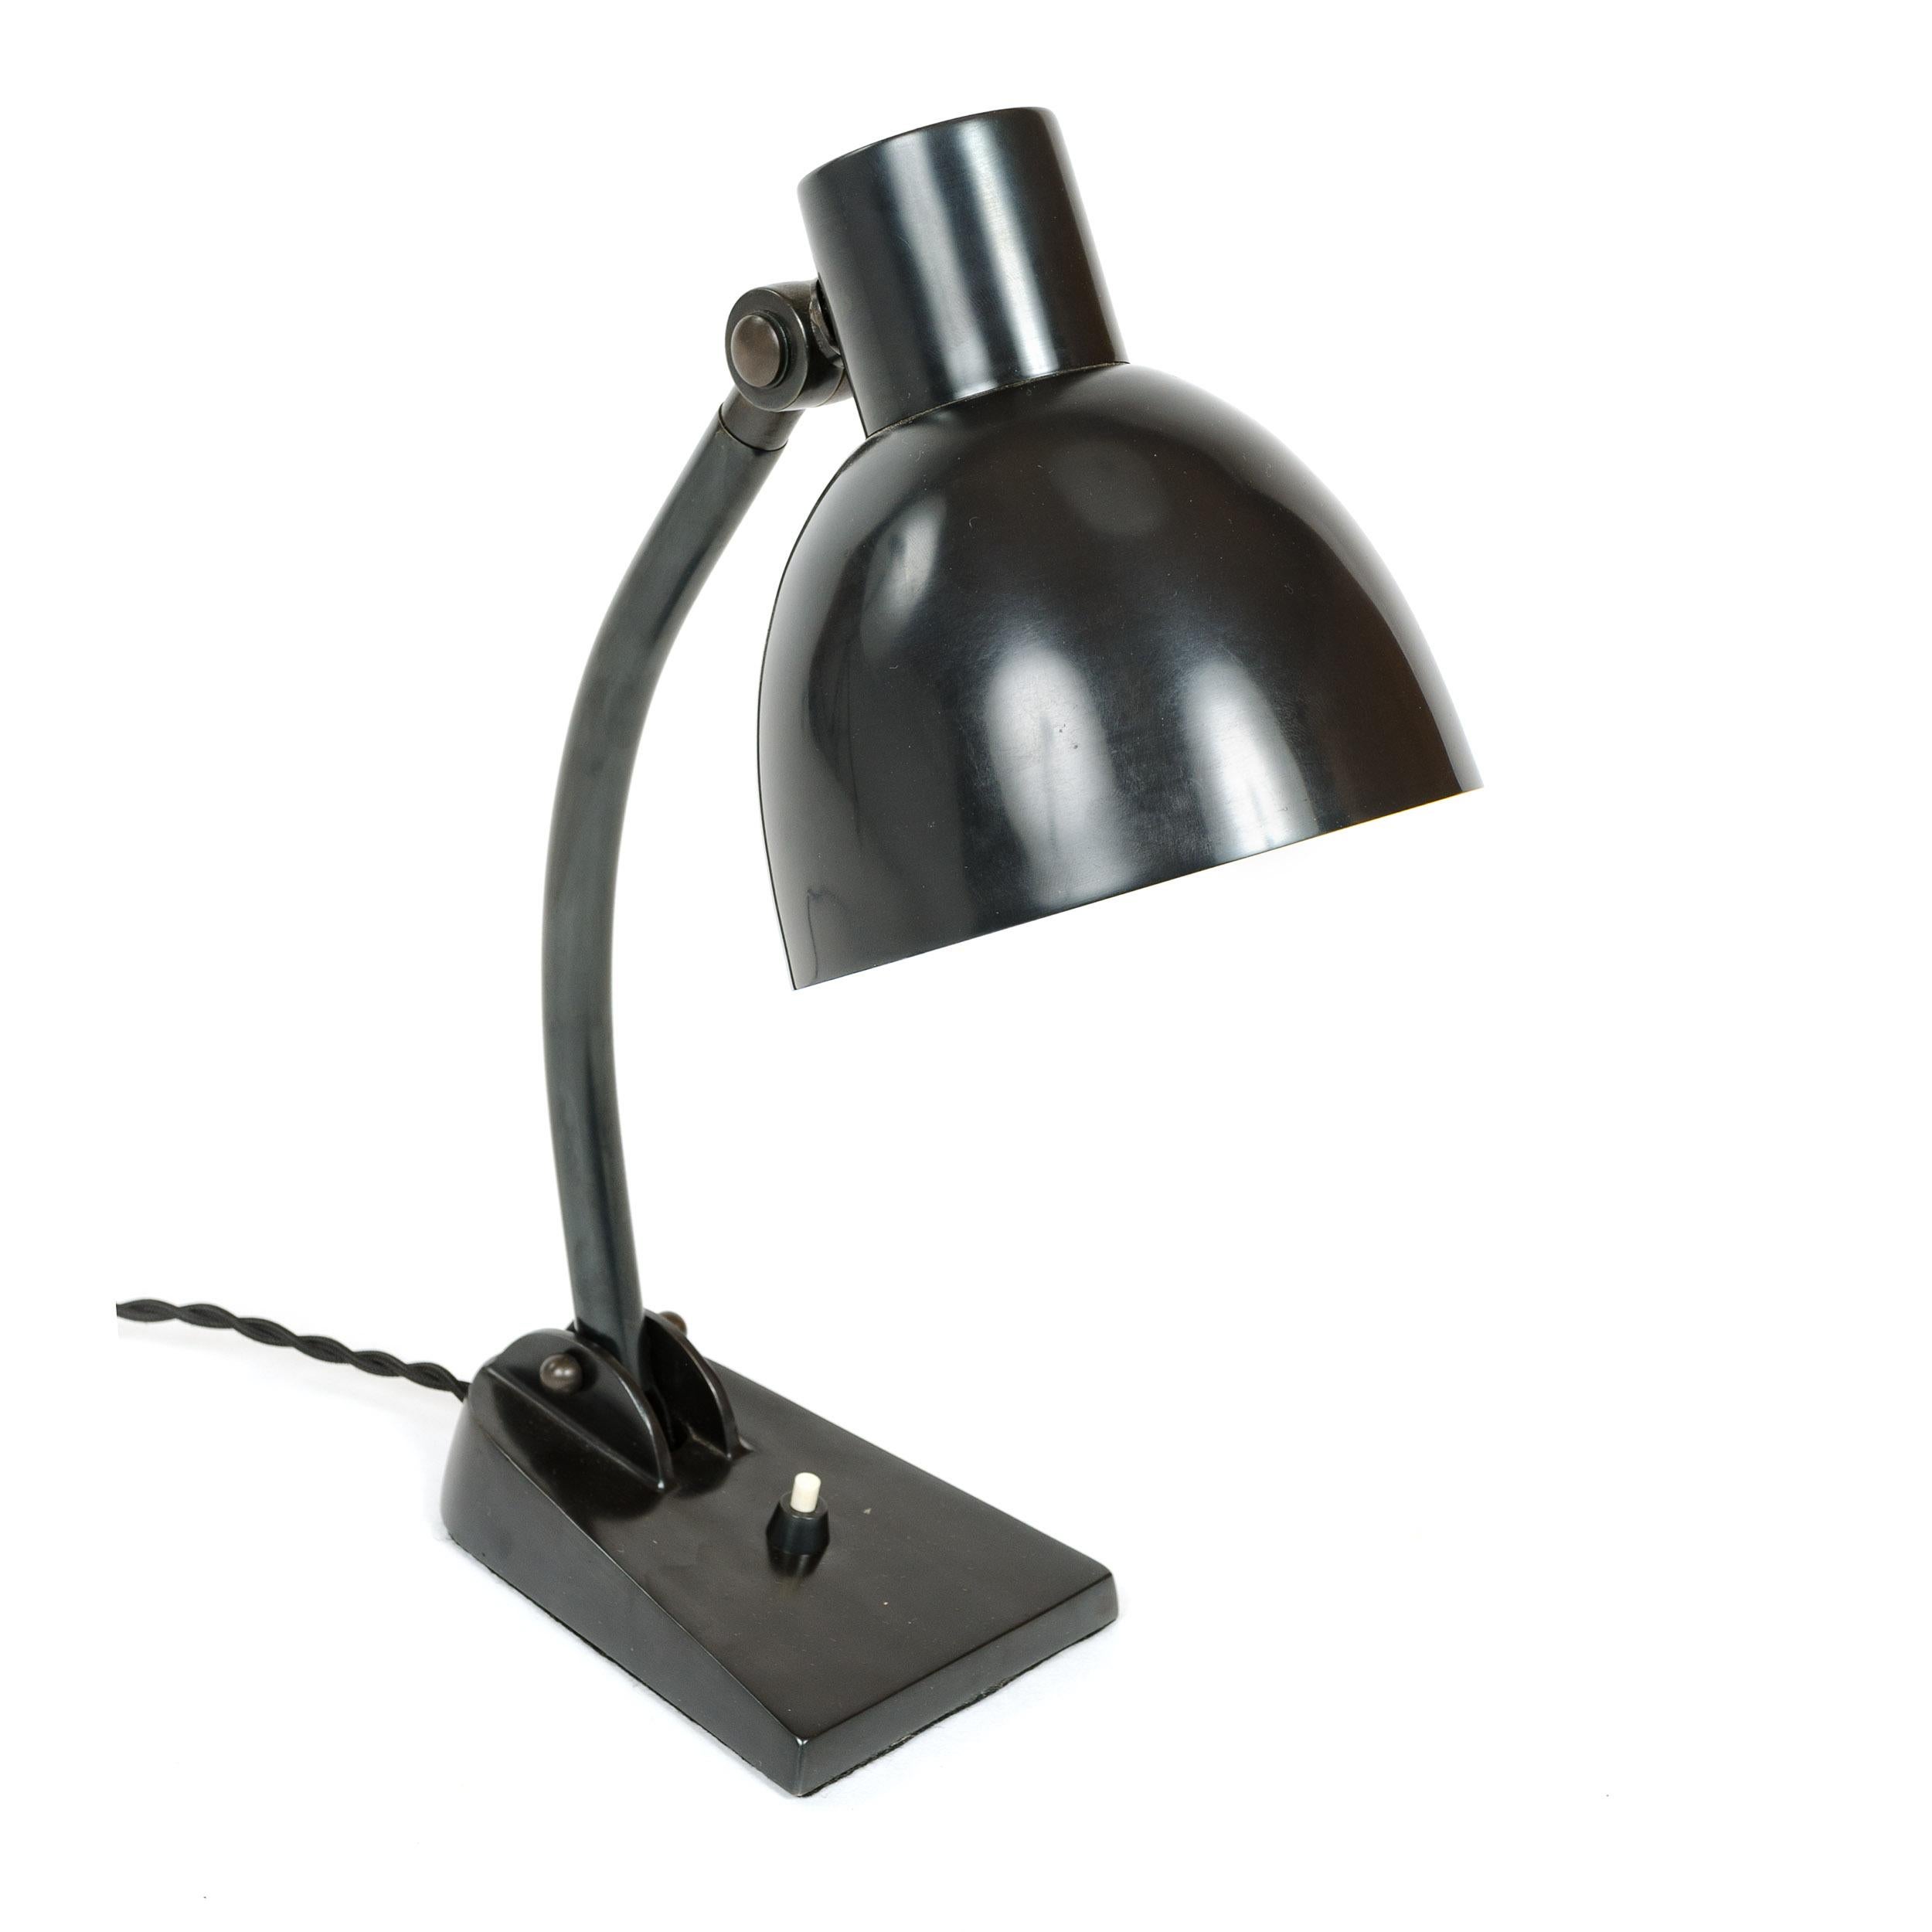 Bauhaus period, fully functional, articulated metal table lamp produced by B.A.G. Turgi in the 1930s. Adjustable metal shade pivots up and down and swivels left to right attaching to an arm jointed at the base allowing for a wide latitude of forward